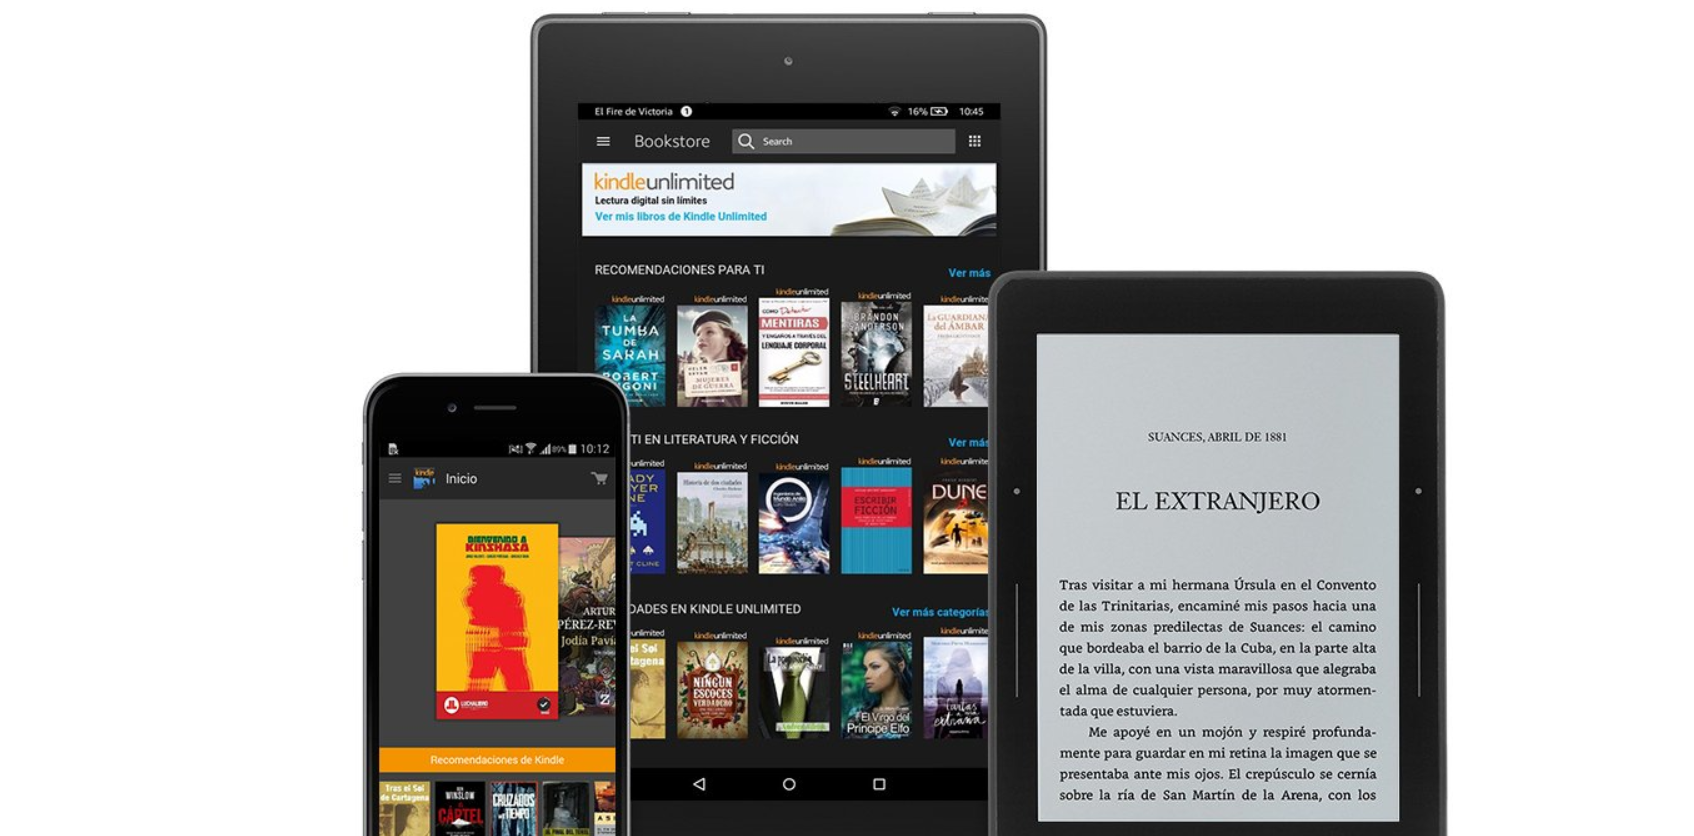 Prime Reading frente a Kindle Unlimited